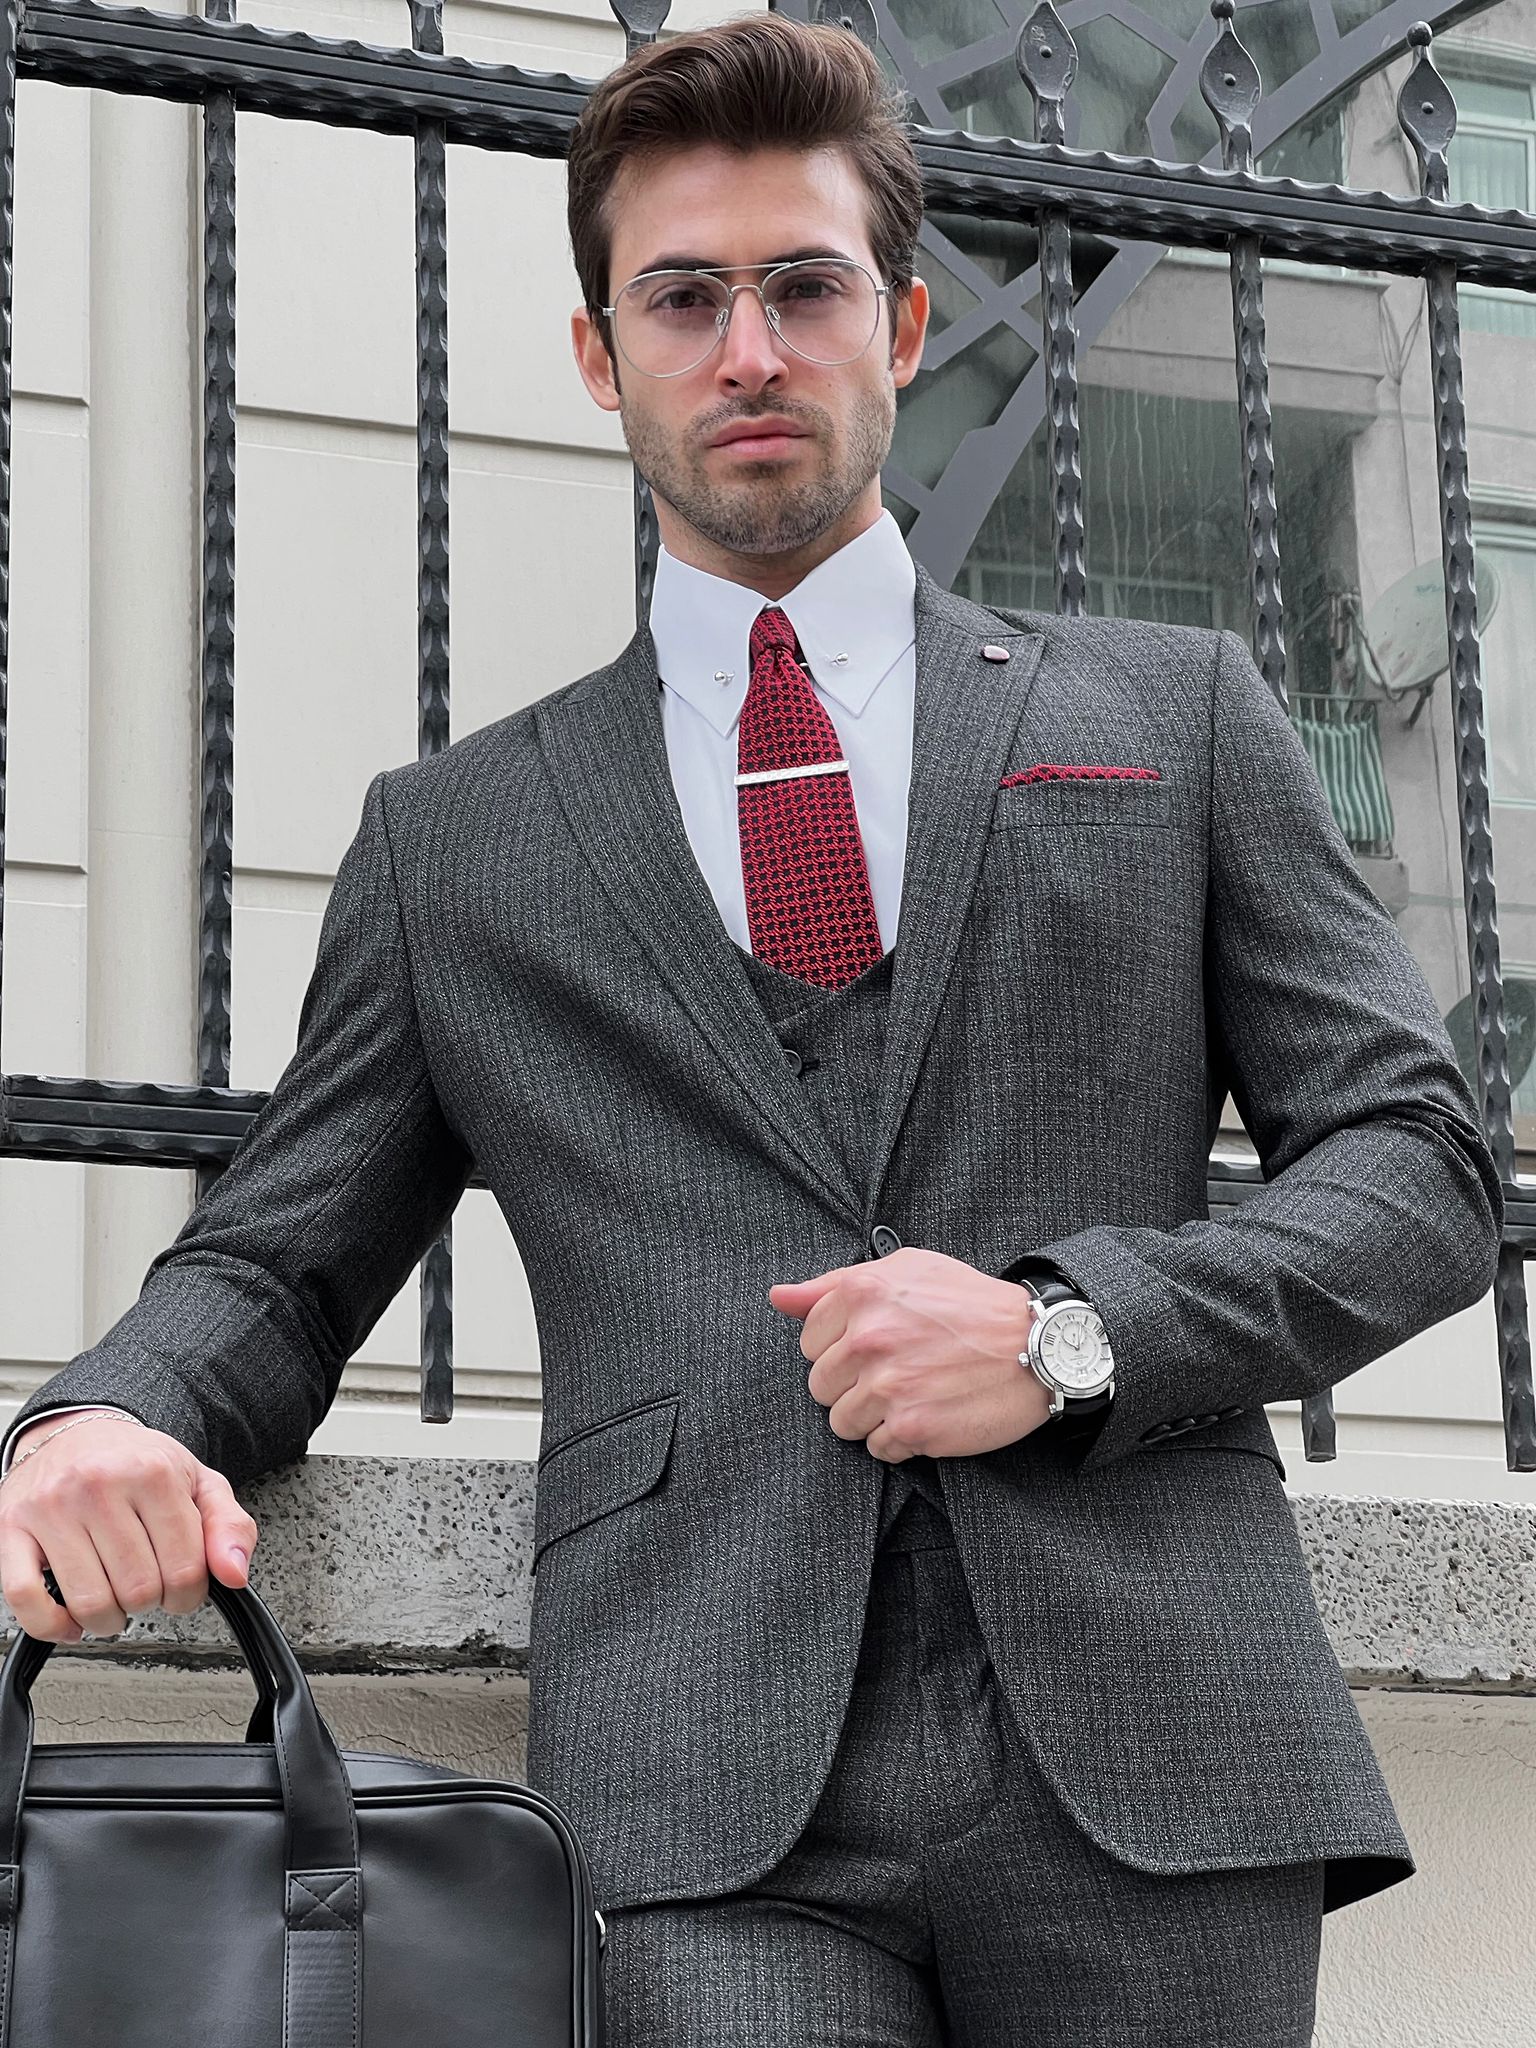 Louis Slim Fit High Quality Patterned Anthracite & Business Suit